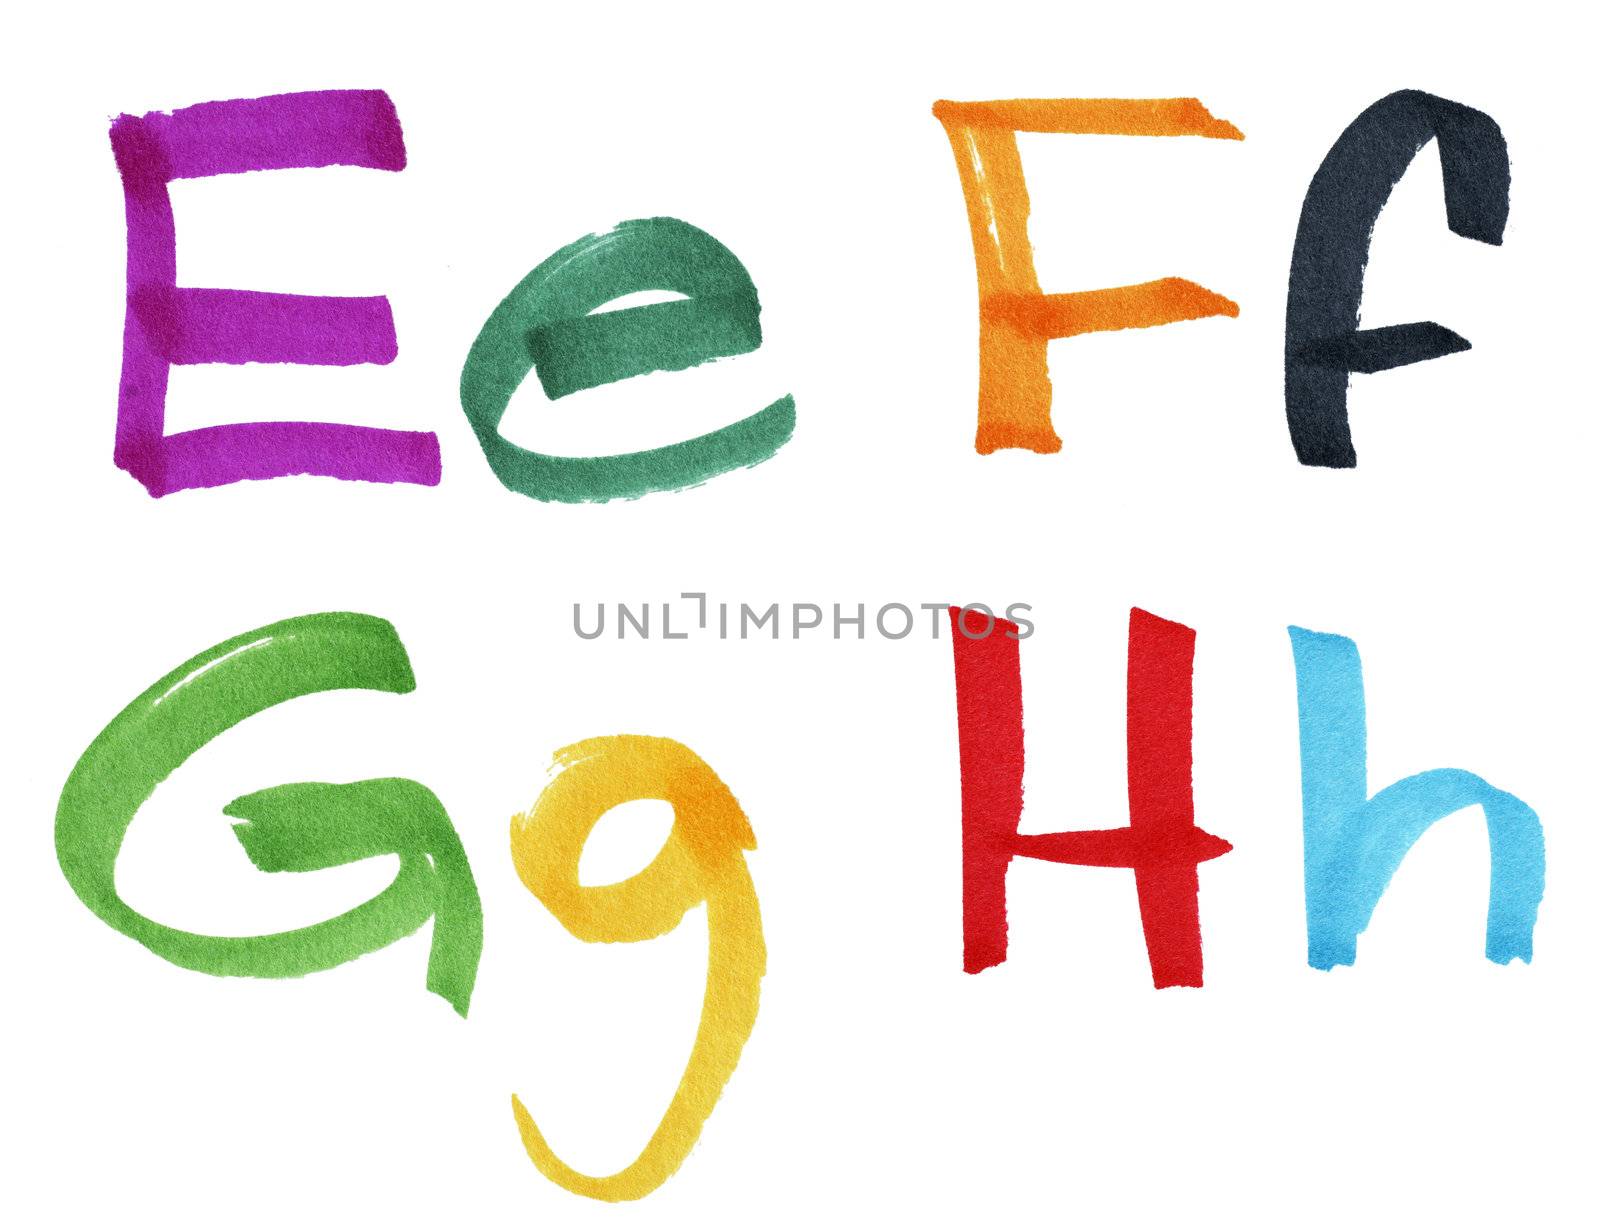 Very large handwritten font, letters E F G H in capital and small cases, made with colorful ink markers and paper fibers visible.